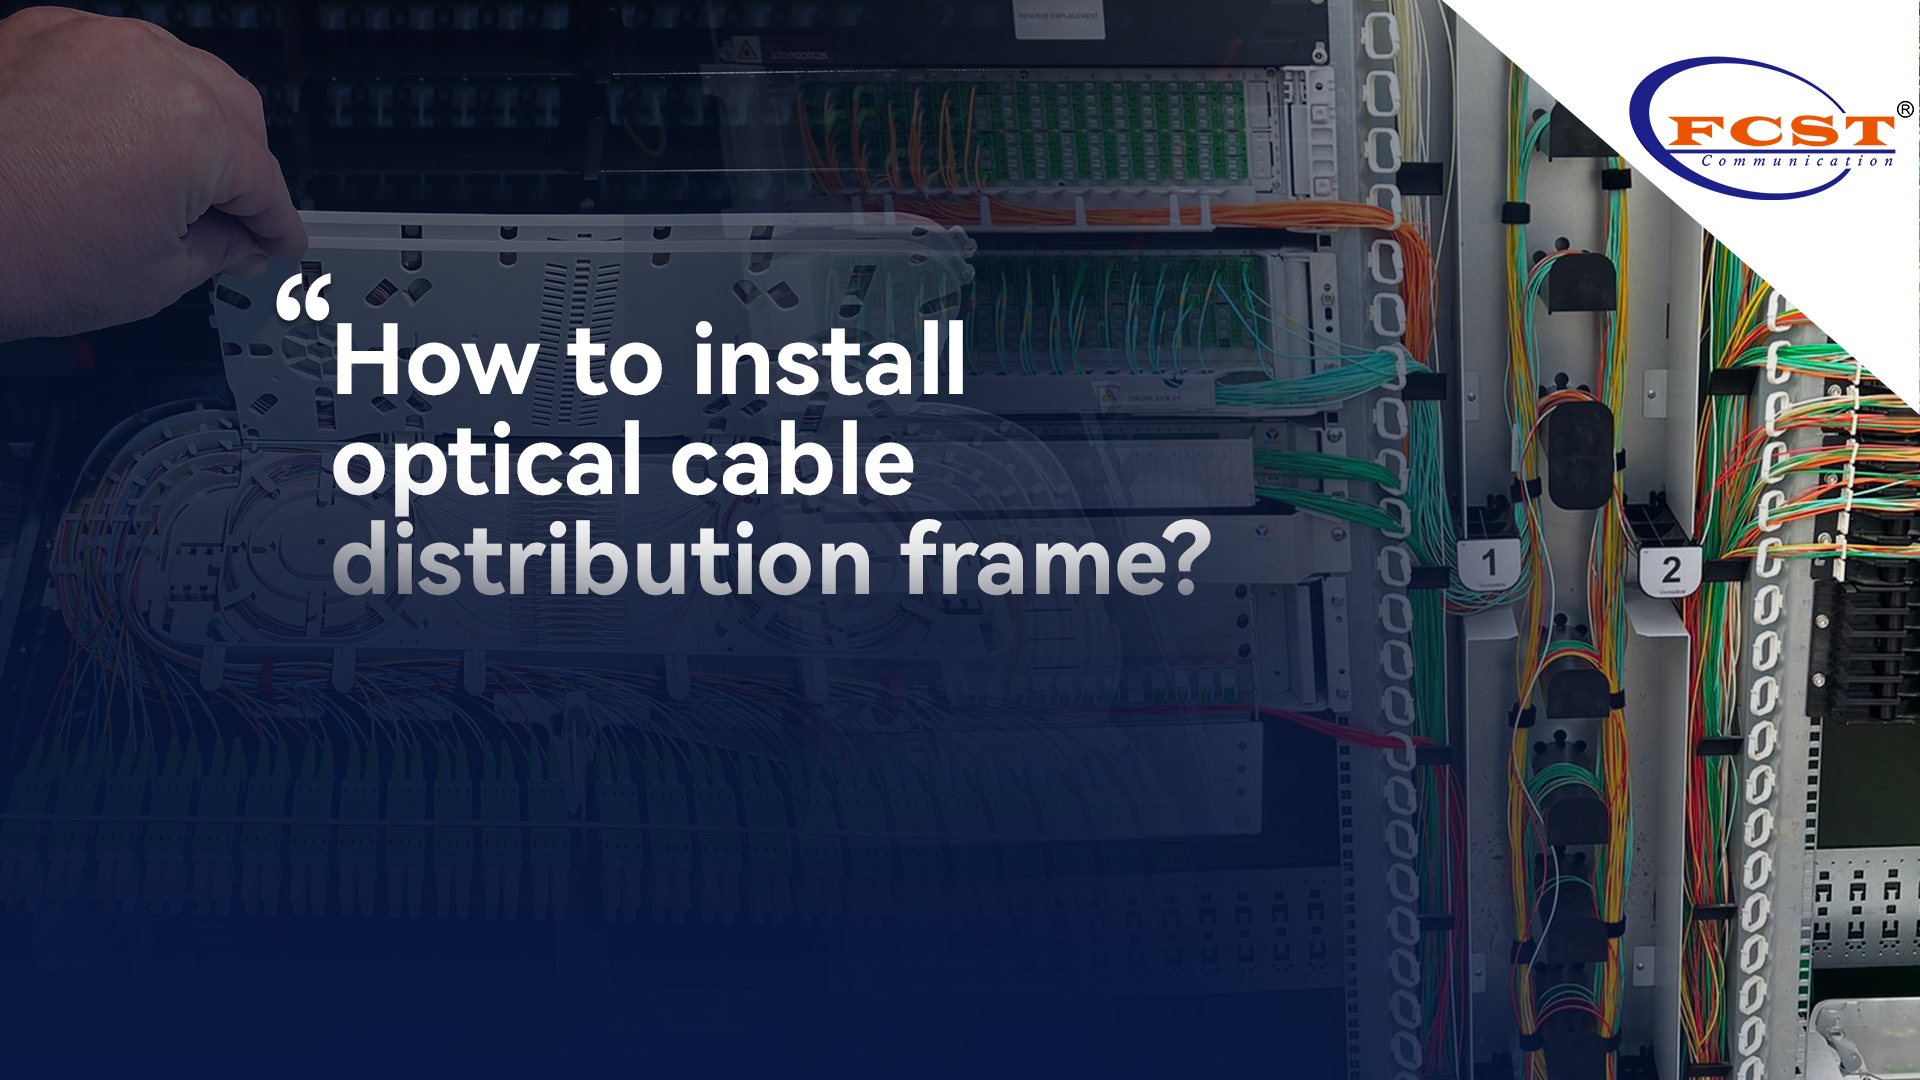 How to install optical cable distribution frame?